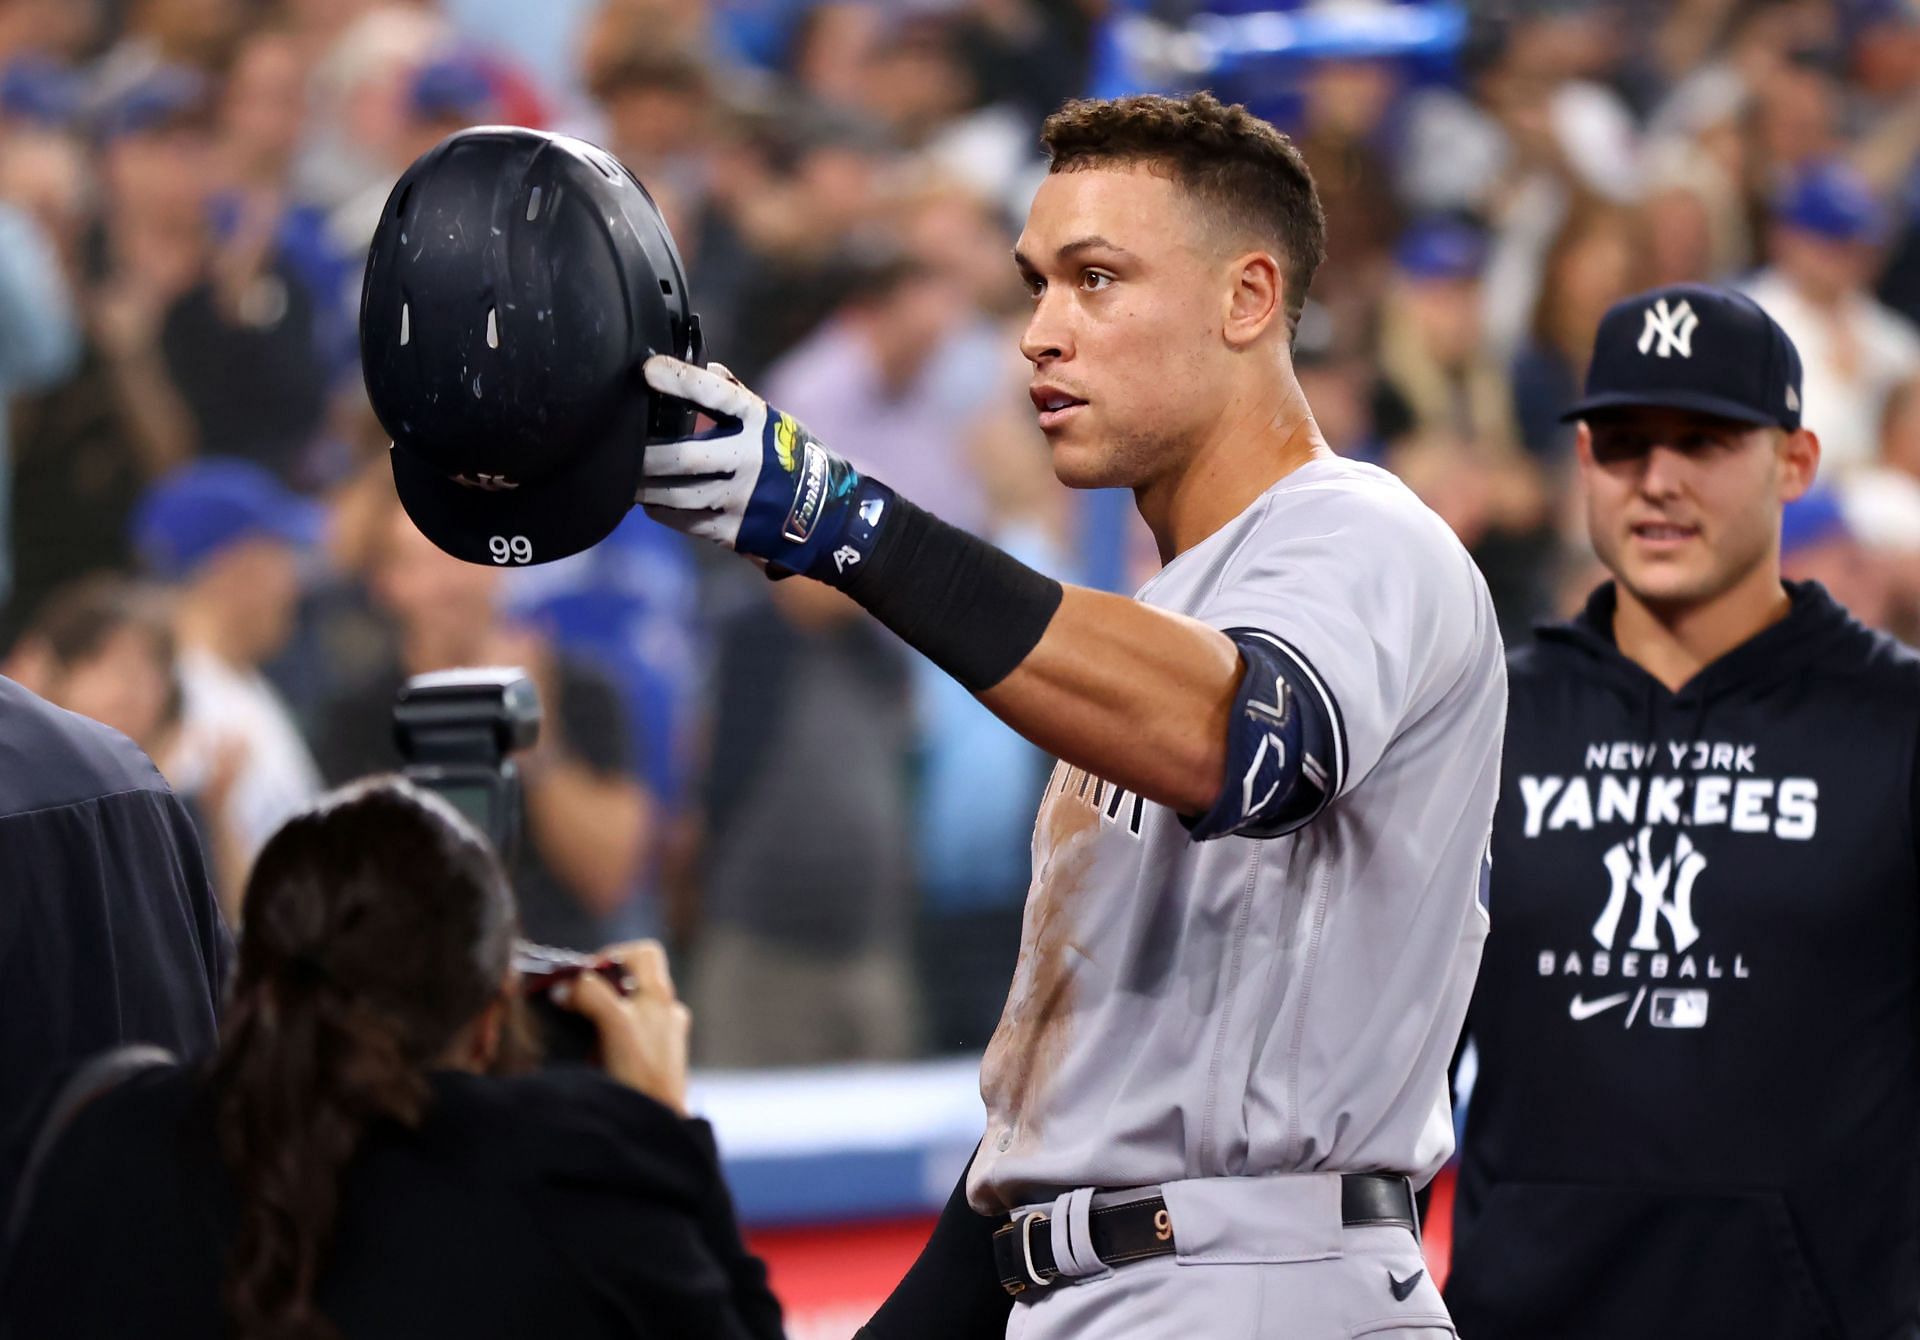 Yankees name Aaron Judge team captain in introductory press